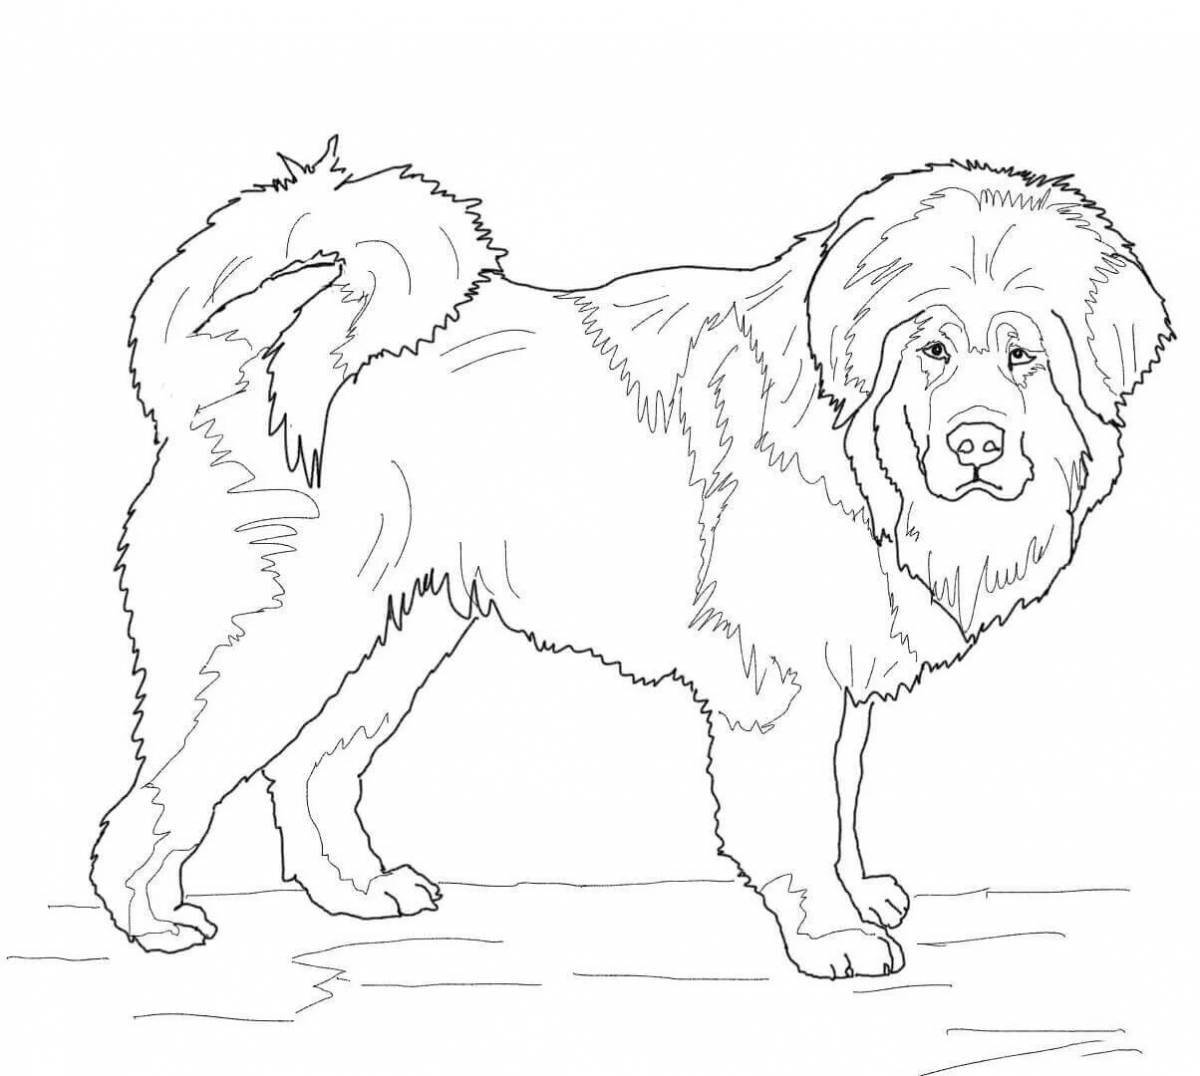 Inspiring service dog coloring pages for kids